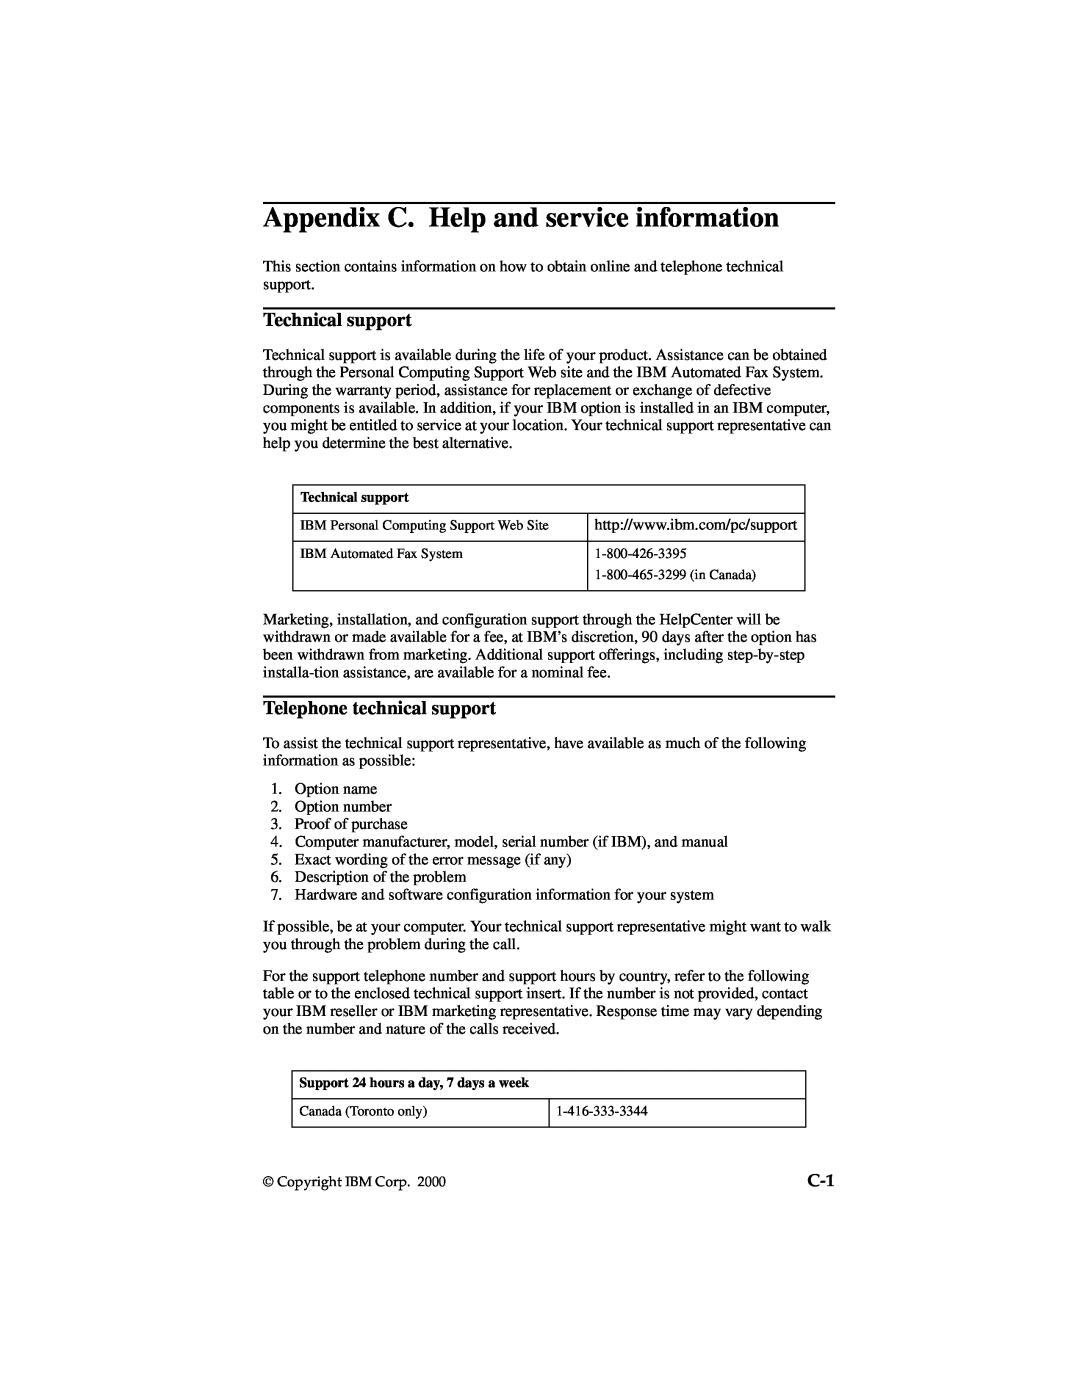 IBM 19K4543 manual Appendix C. Help and service information, Technical support, Telephone technical support 